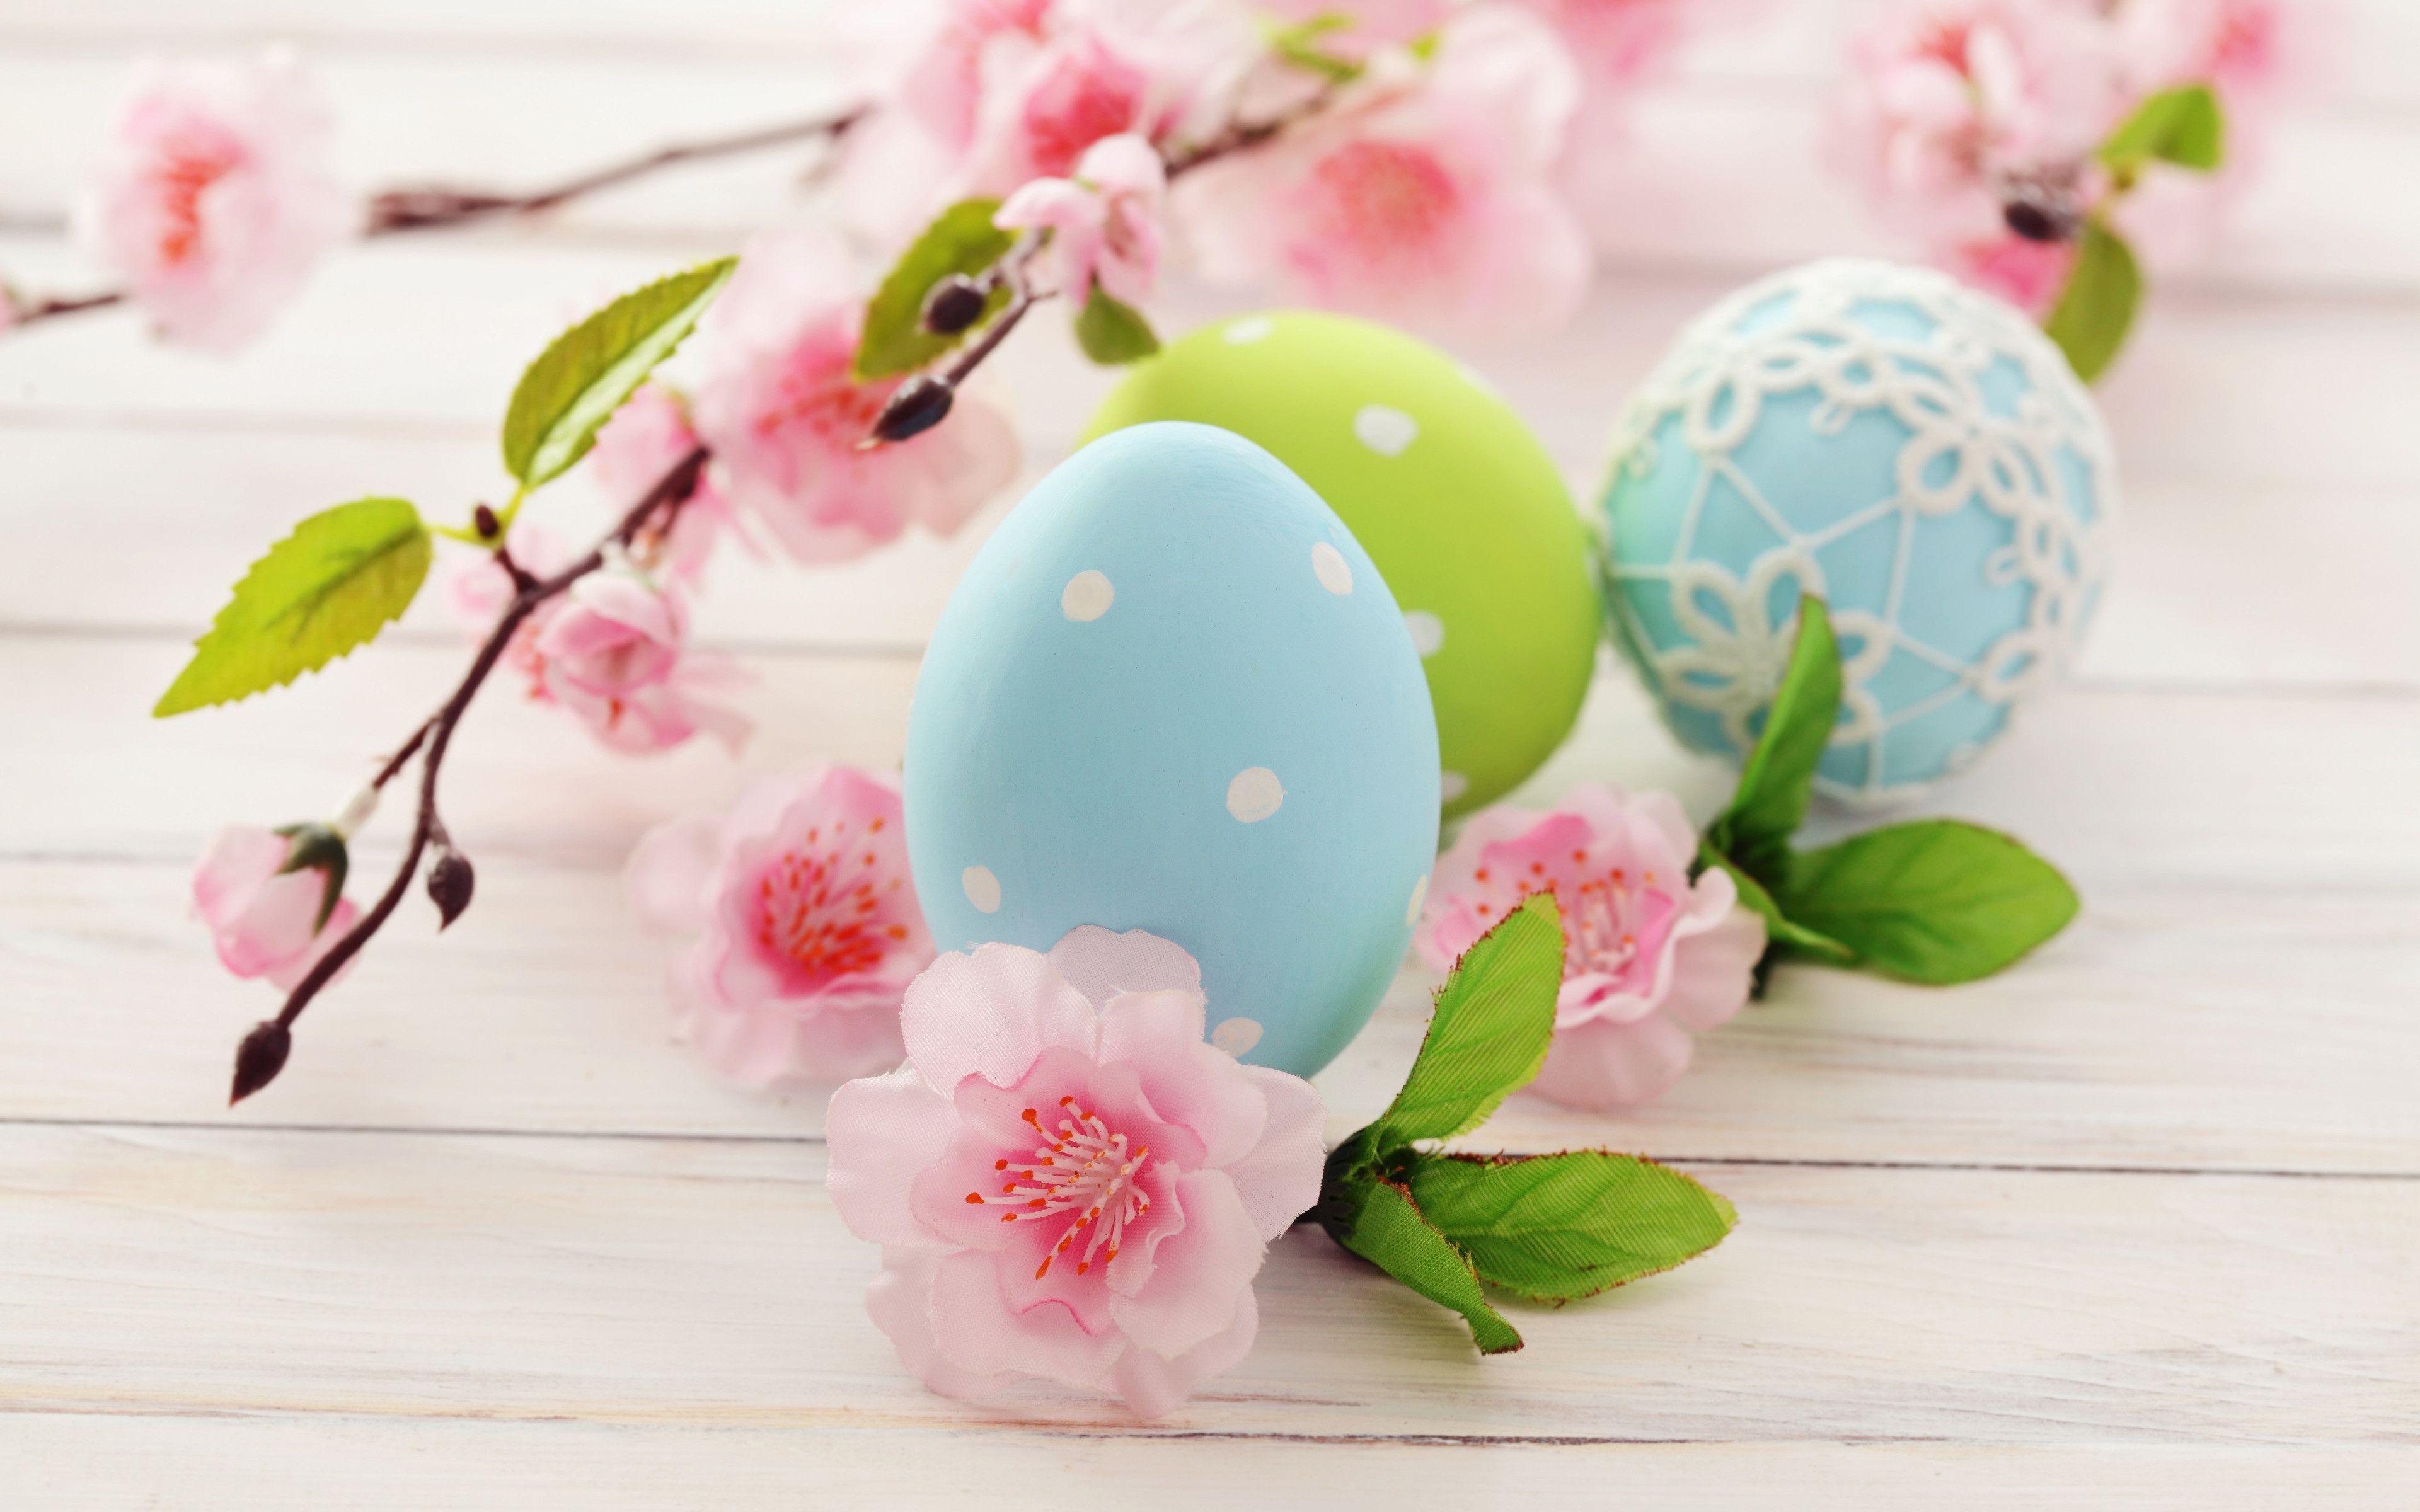 Cherry Blossoms and Easter Eggs widescreen wallpaper. Wide